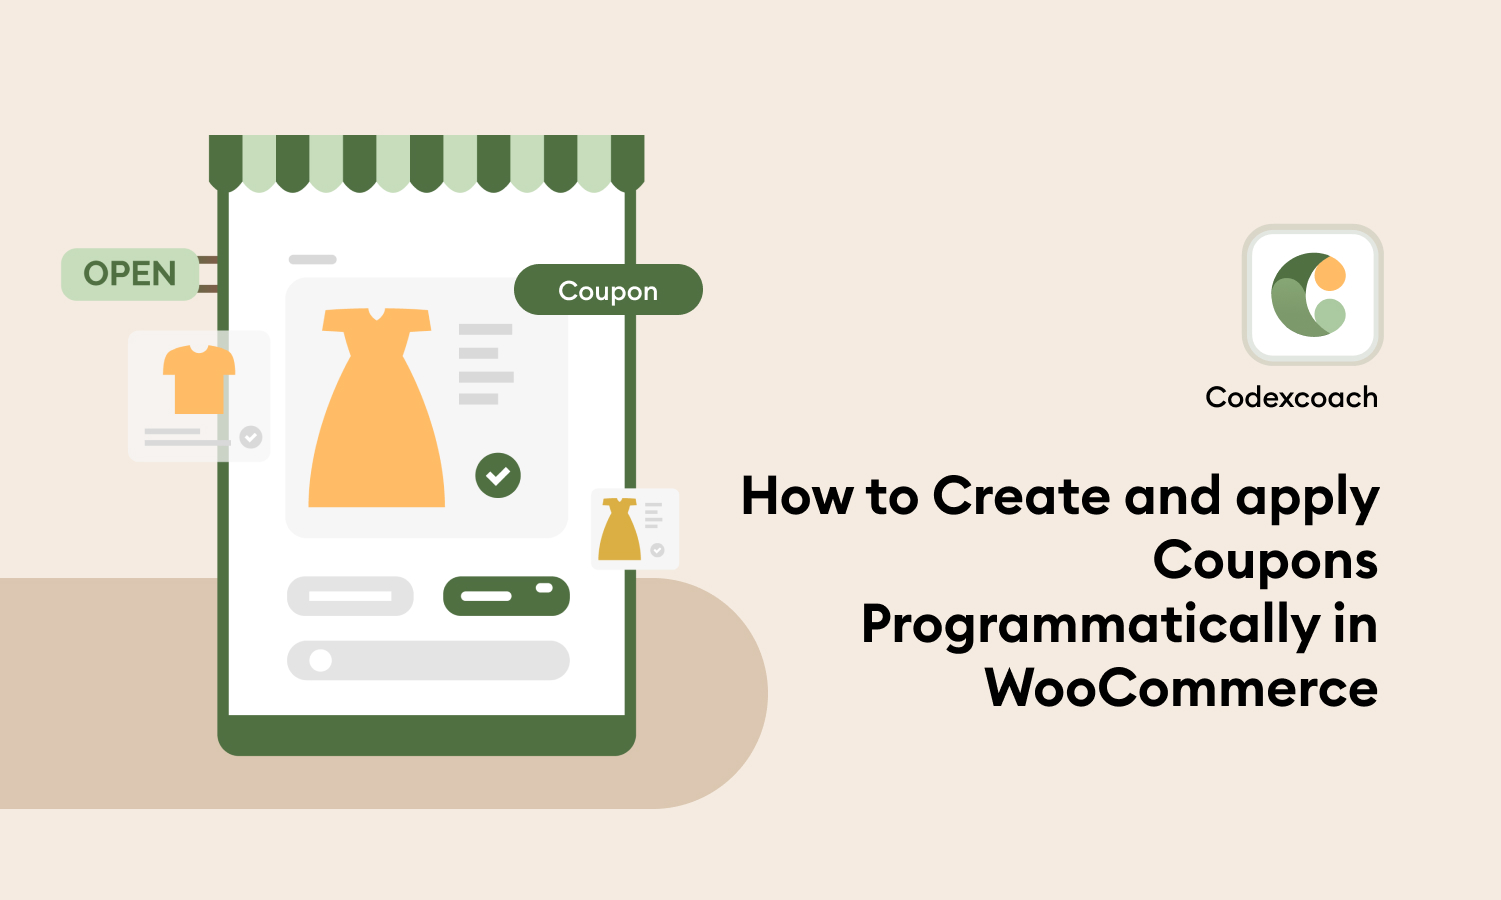 How to Create and apply Coupons Programmatically in WooCommerce